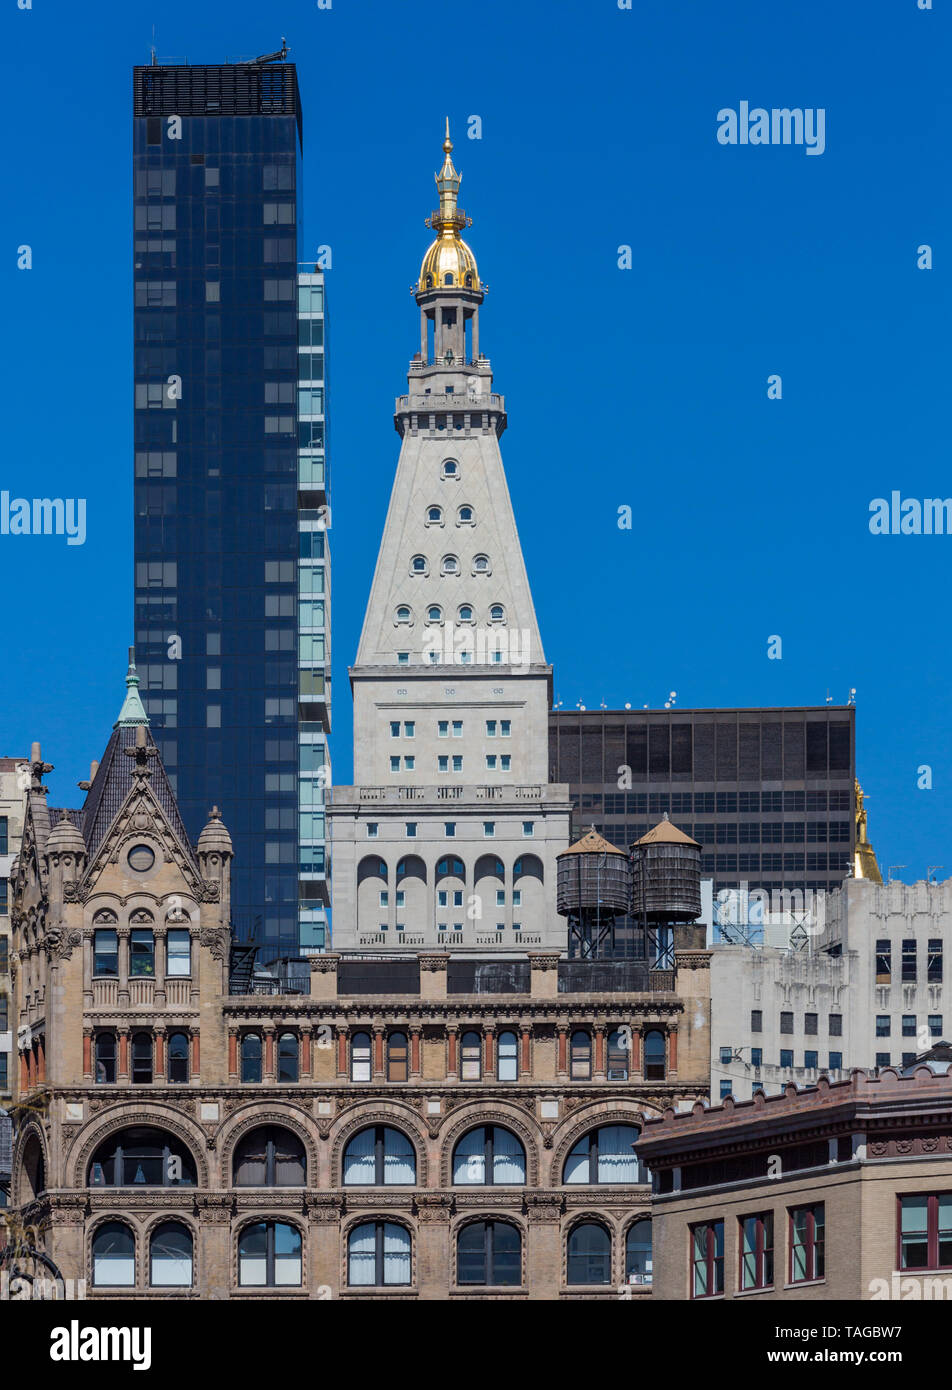 towers rooftop aUnion Square  Manhattan Landmarks in New York City USA Stock Photo